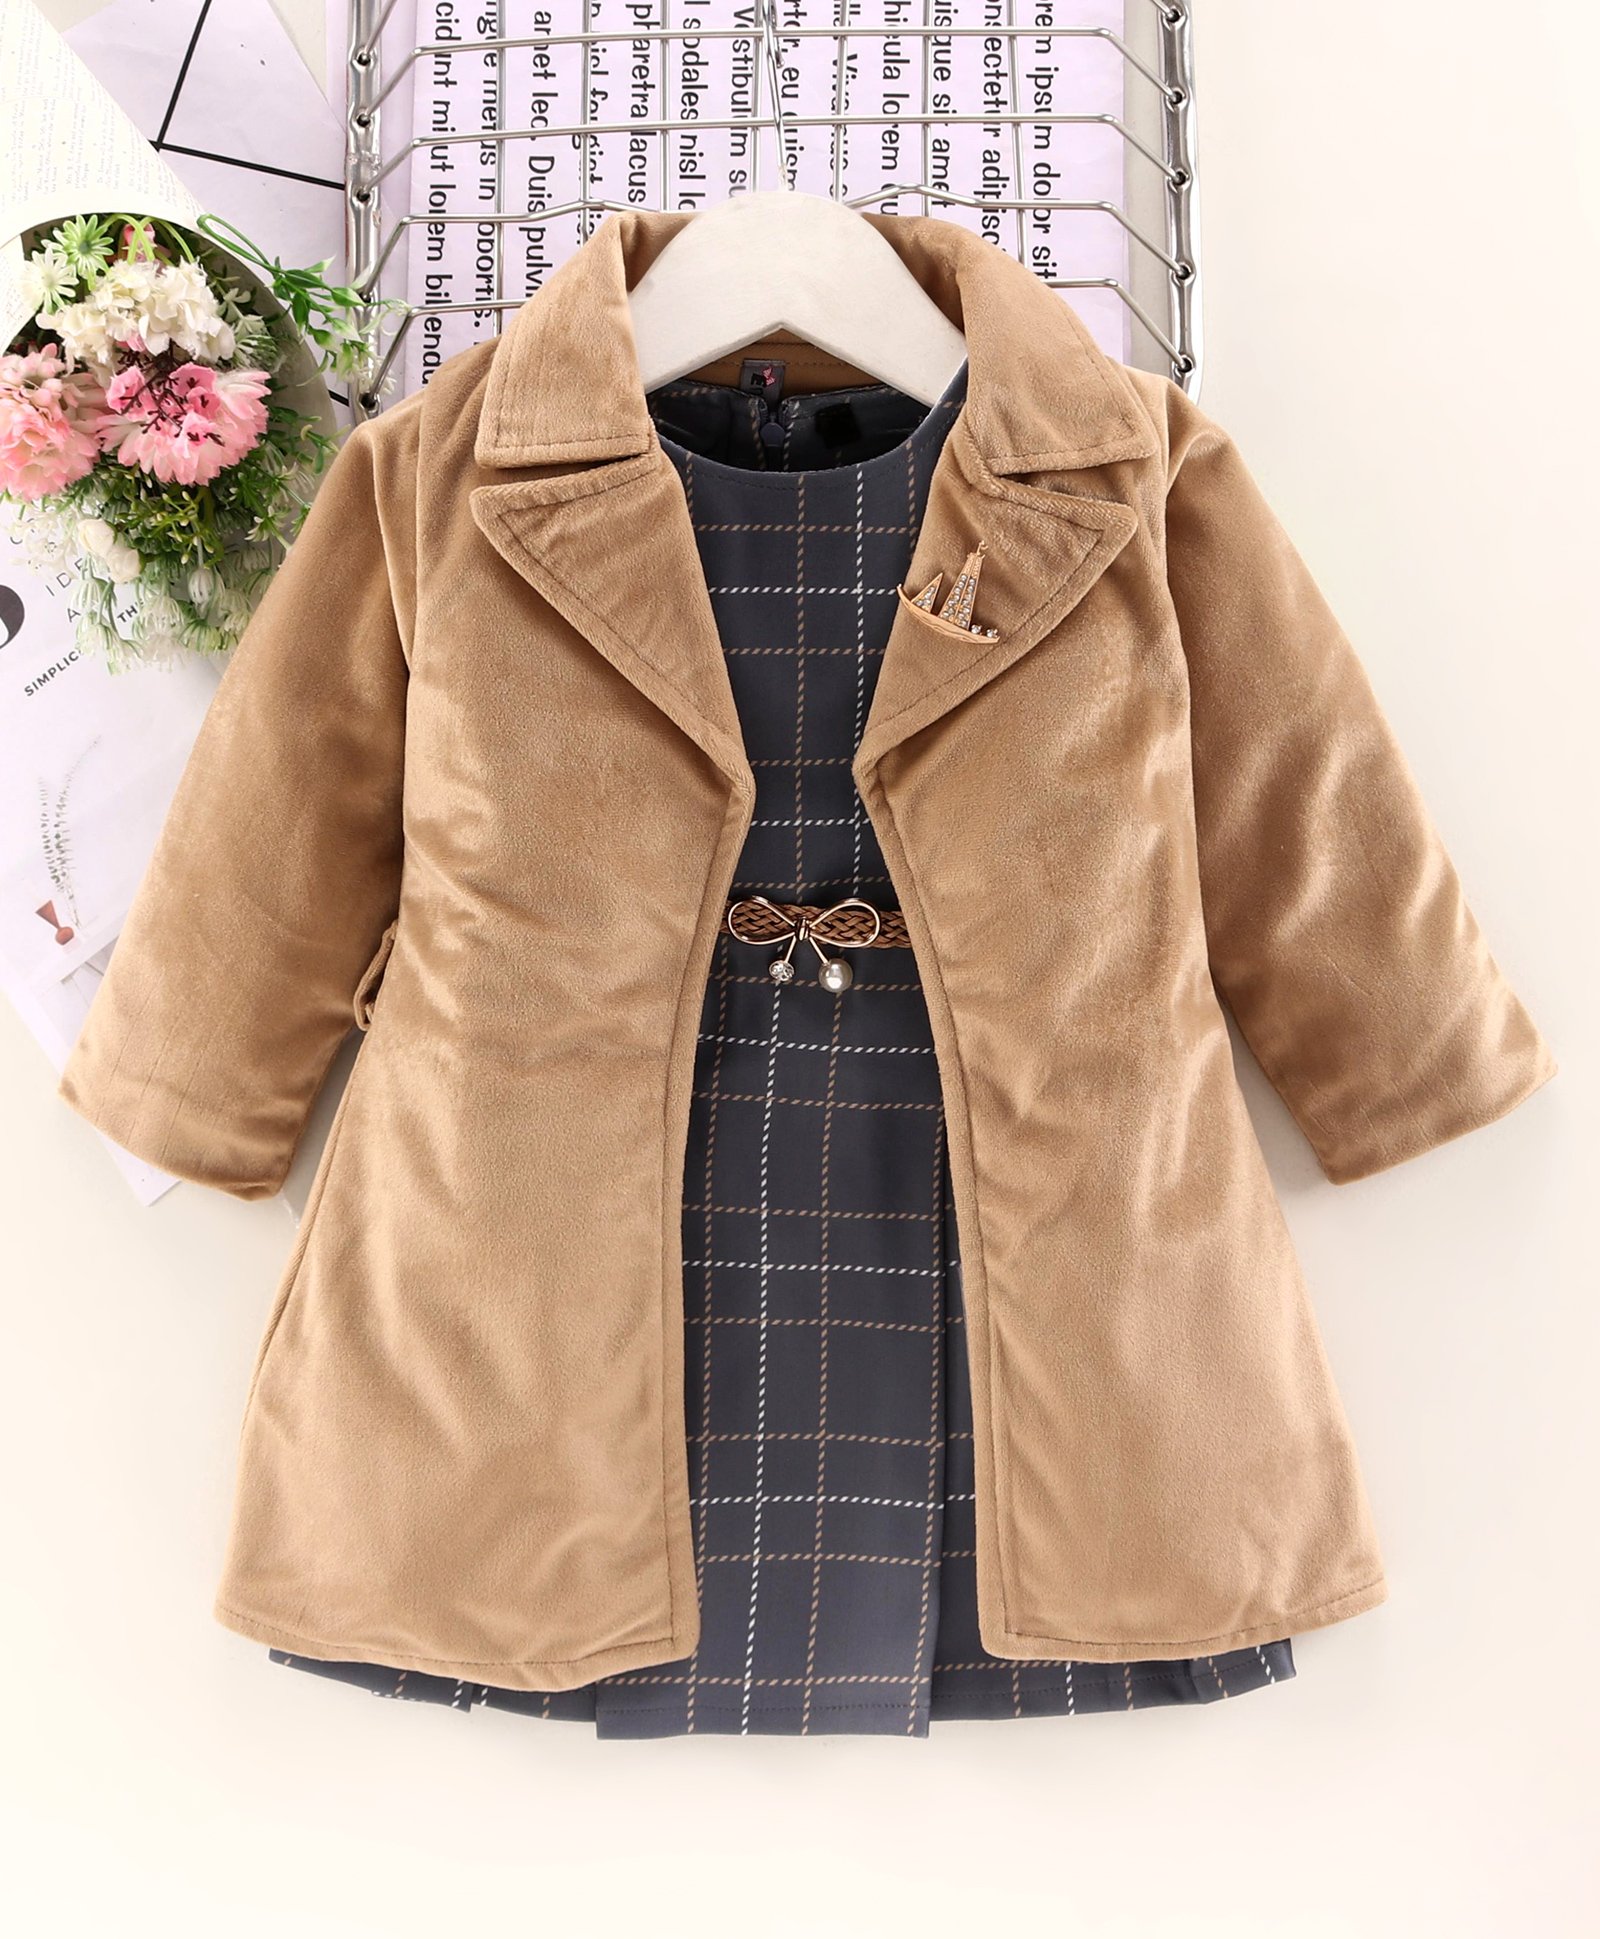 Buy Enfance Full Sleeves Long Jacket With Checked Dress Belt Khaki For Girls 7 8 Years Online In India Shop At Firstcry Com